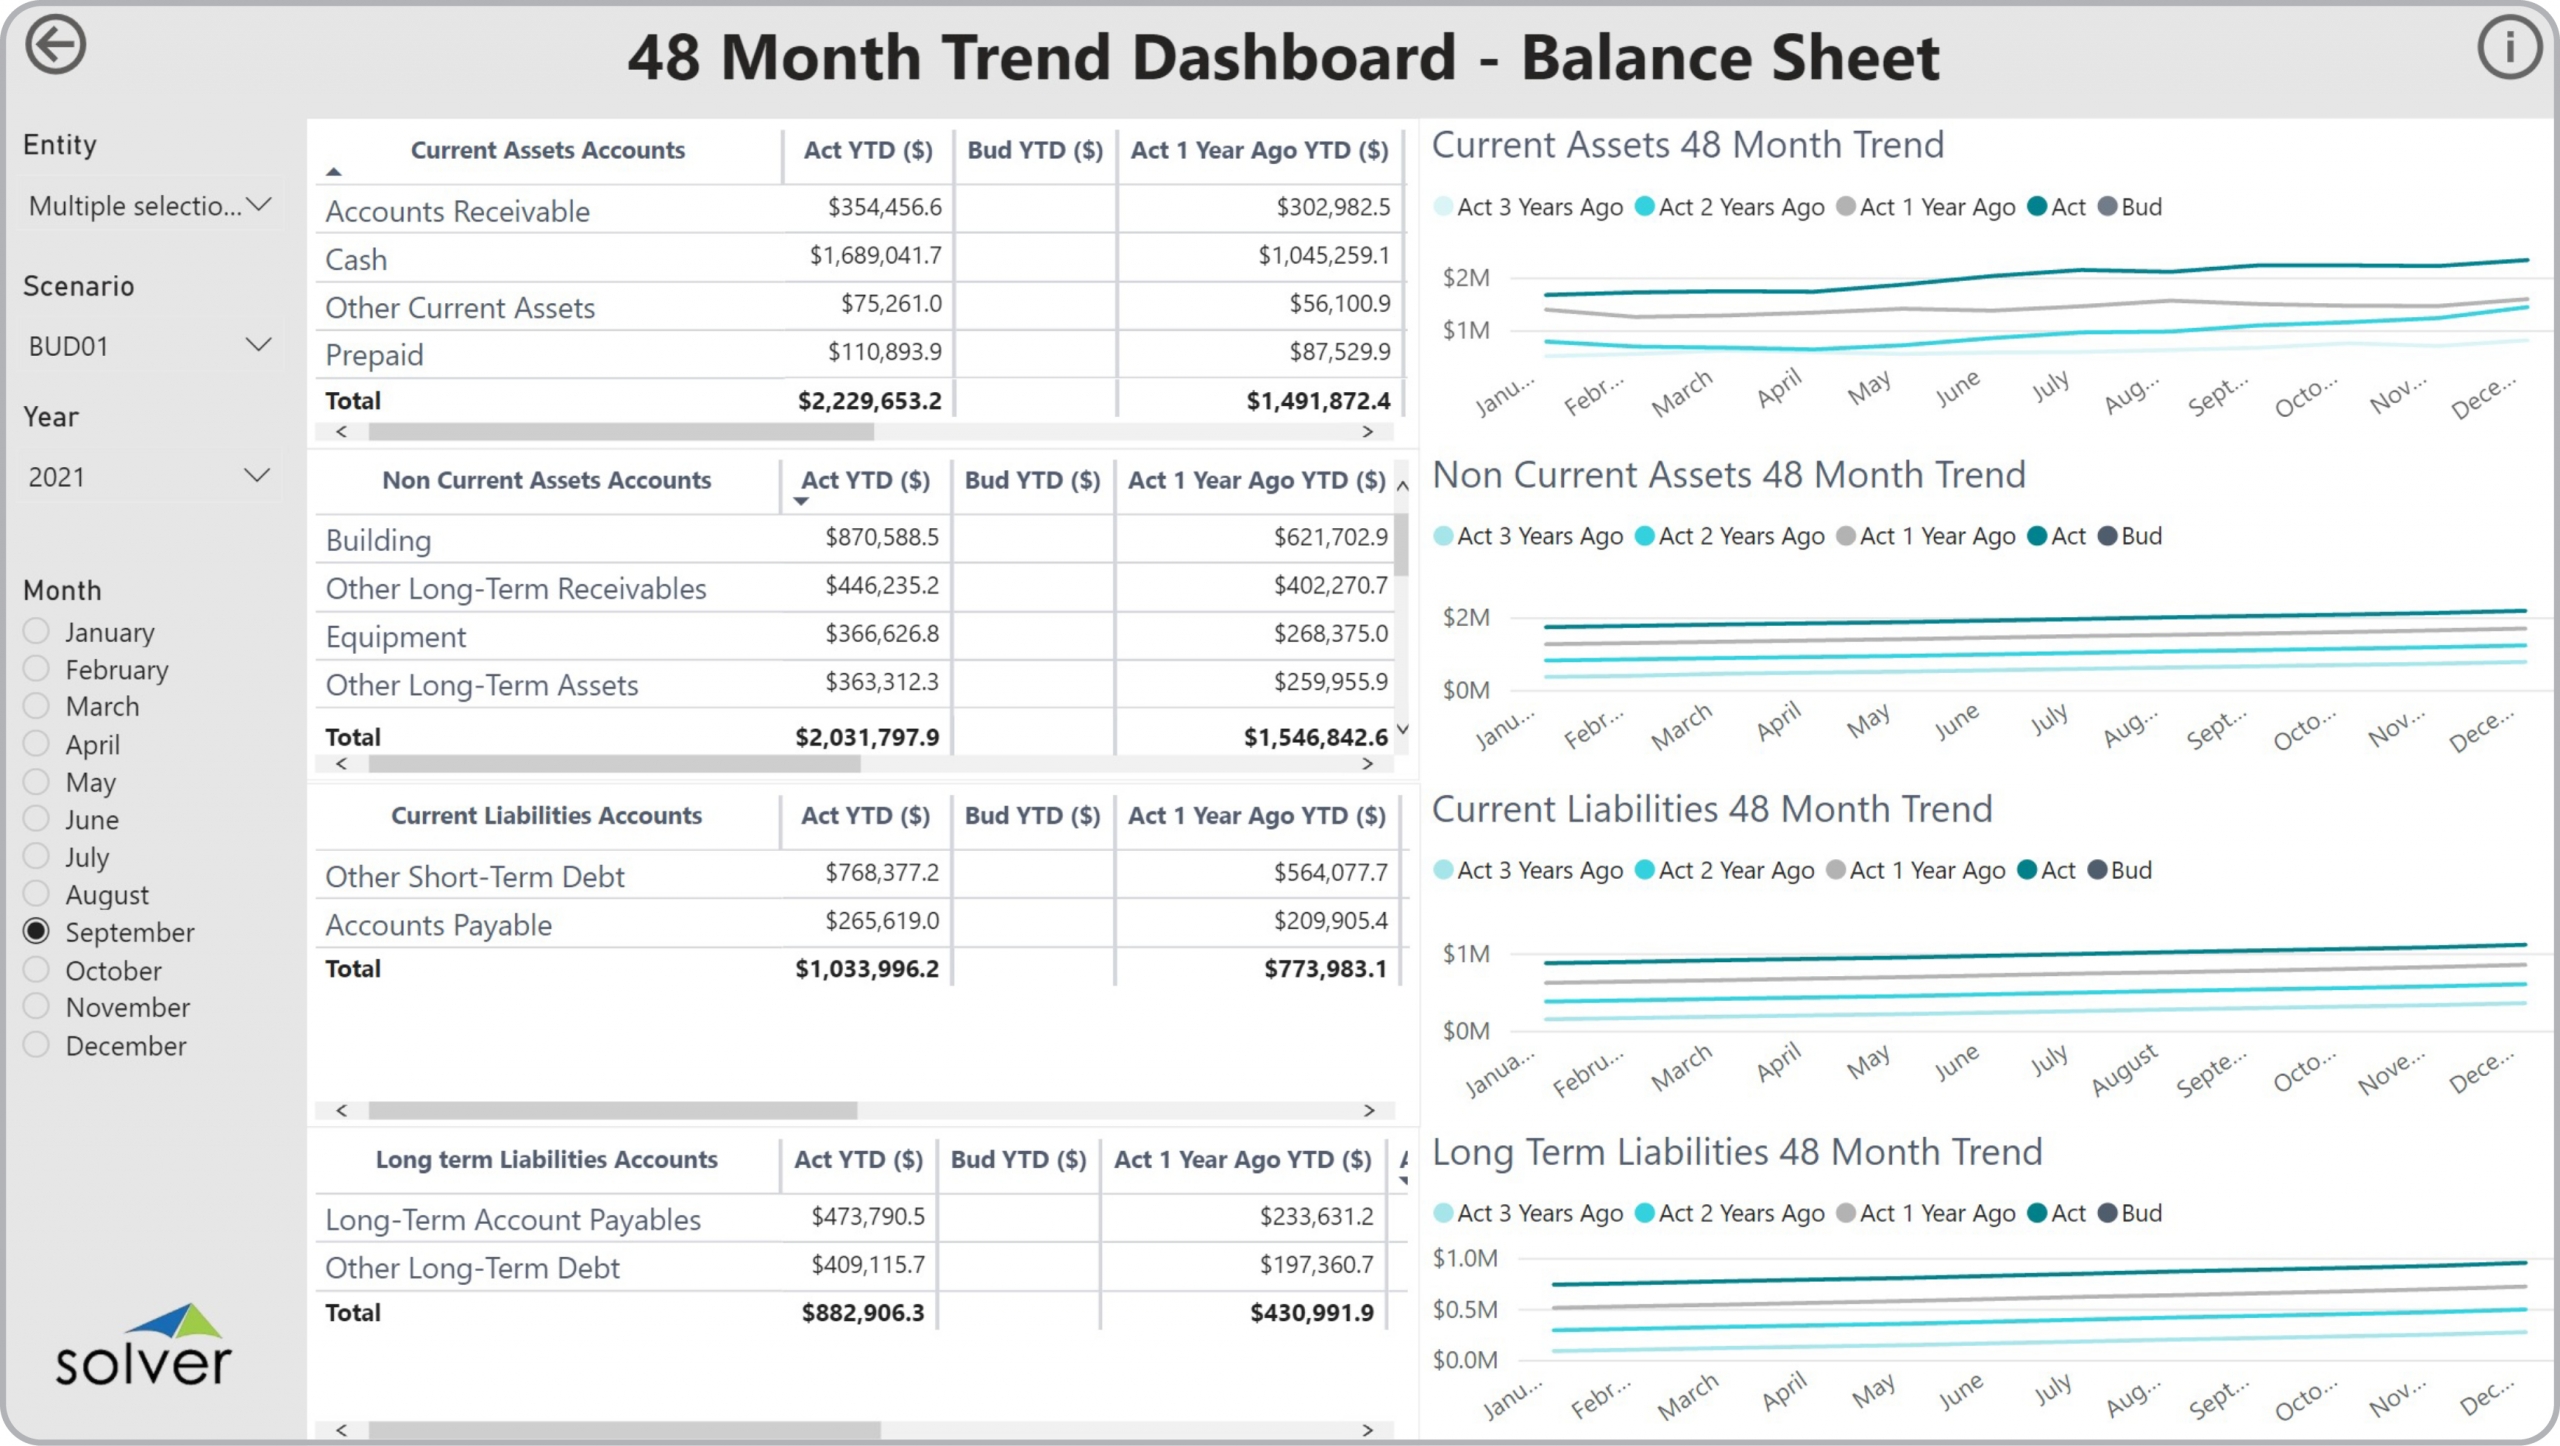 Example of a 48 Month Balance Sheet Trend Dashboard to Streamline the Monthly Reporting Process